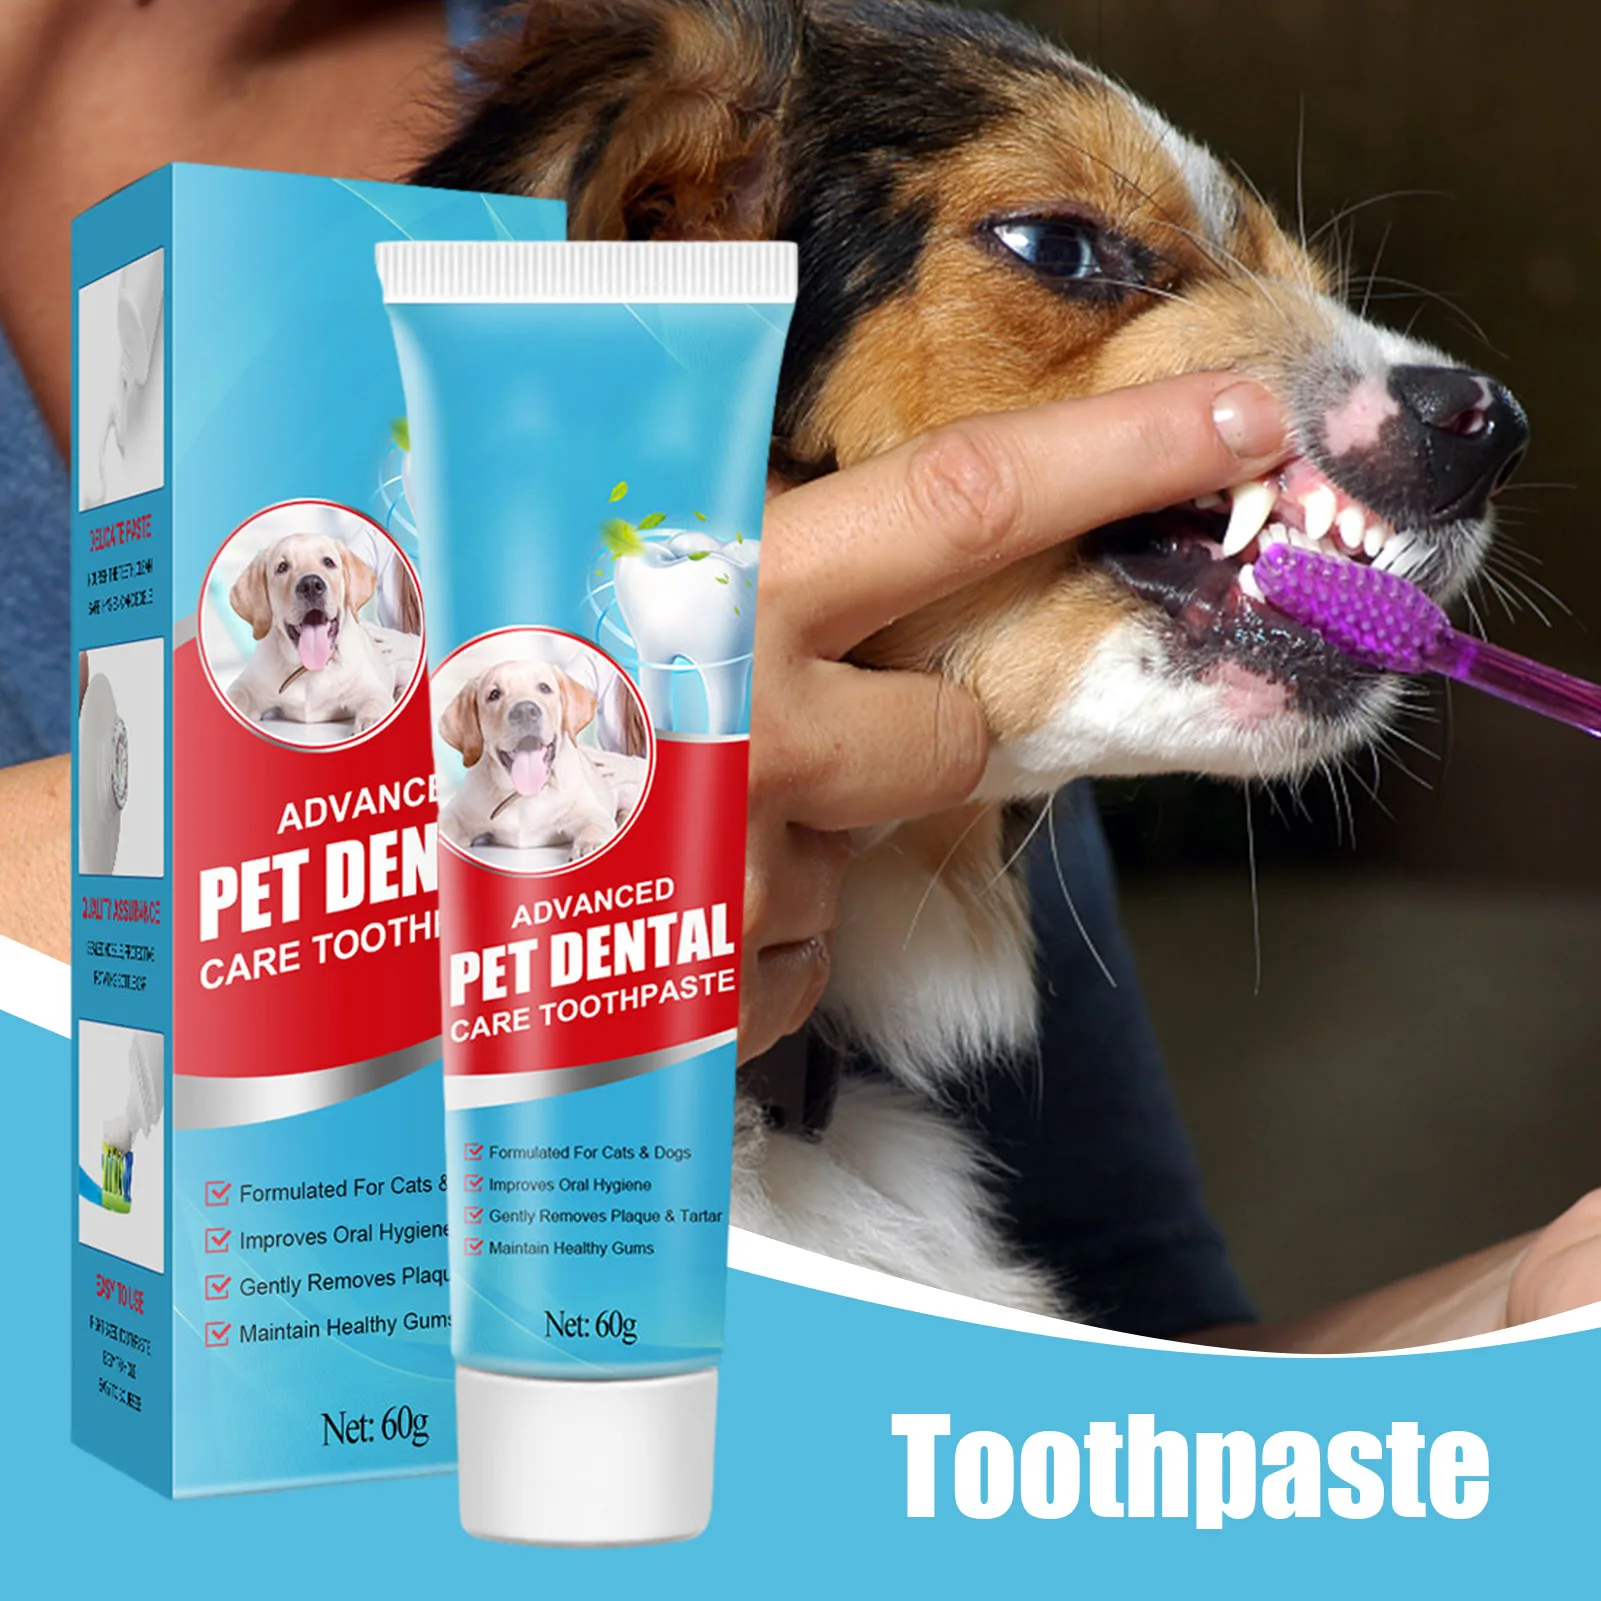 

Dog Toothpaste Pet Teeth Brushing Cleaning Bad Breath Promote Fresh Breath 2 Oz Cat Dental Care Tooth Paste Prevent Tartar